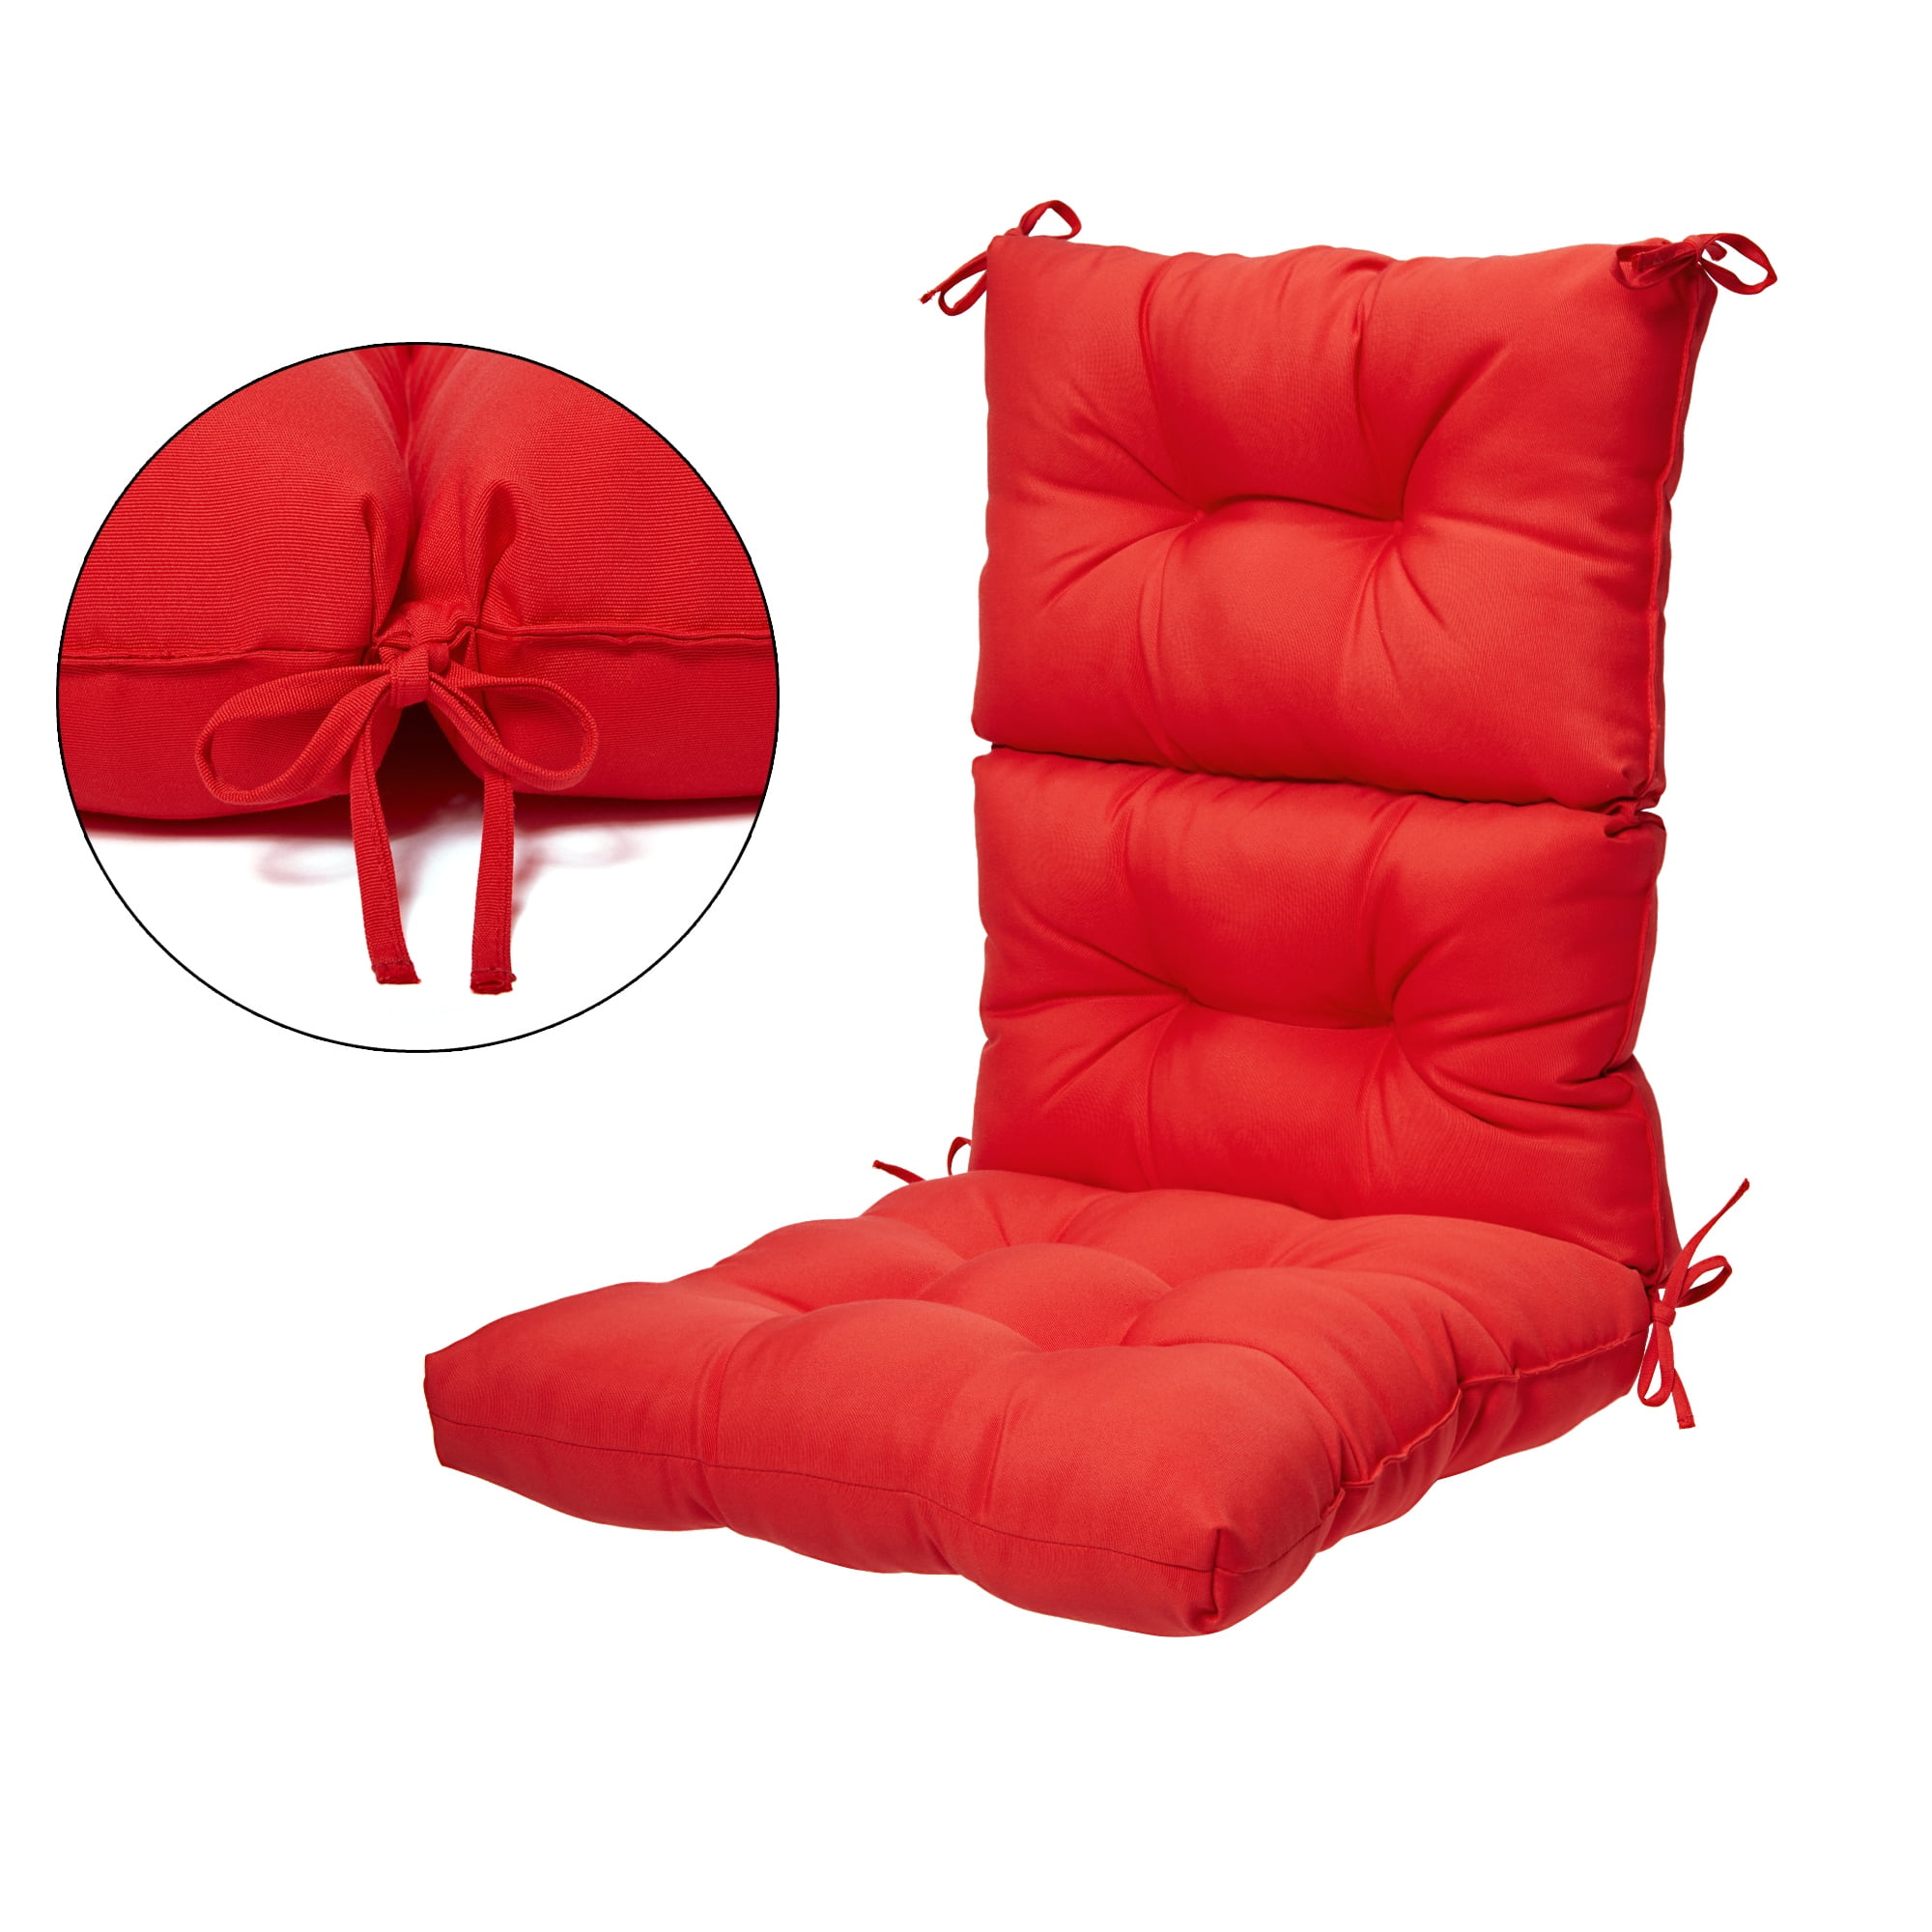 In/Outdoor Patio Comfort Dining Chair Cushion High Back Soft Seat Pad Waterproof